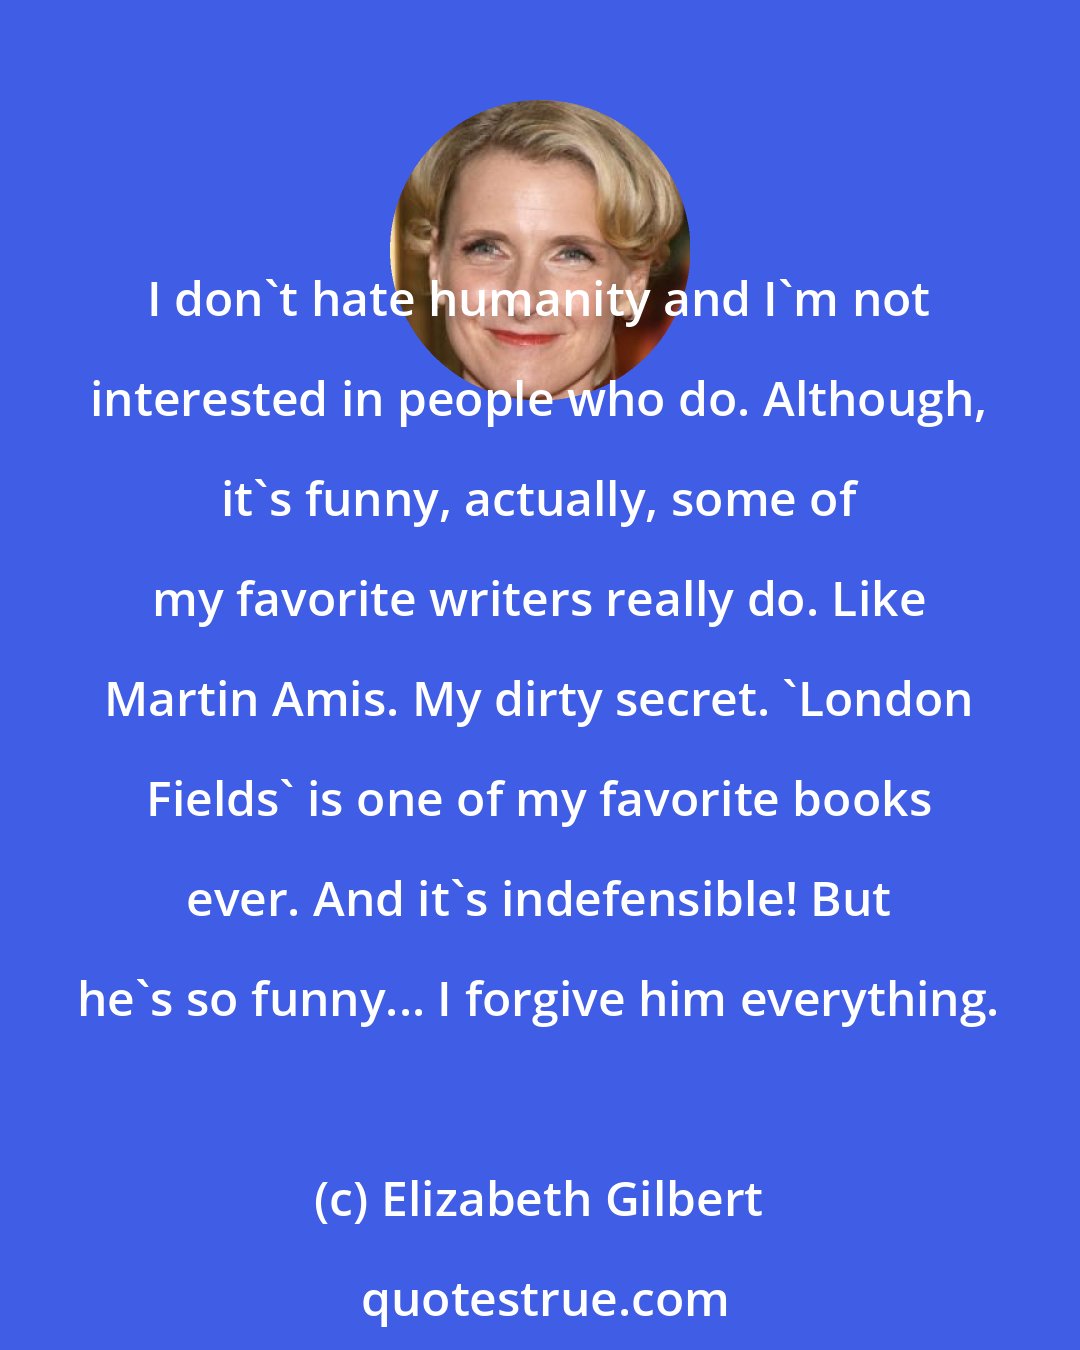 Elizabeth Gilbert: I don't hate humanity and I'm not interested in people who do. Although, it's funny, actually, some of my favorite writers really do. Like Martin Amis. My dirty secret. 'London Fields' is one of my favorite books ever. And it's indefensible! But he's so funny... I forgive him everything.